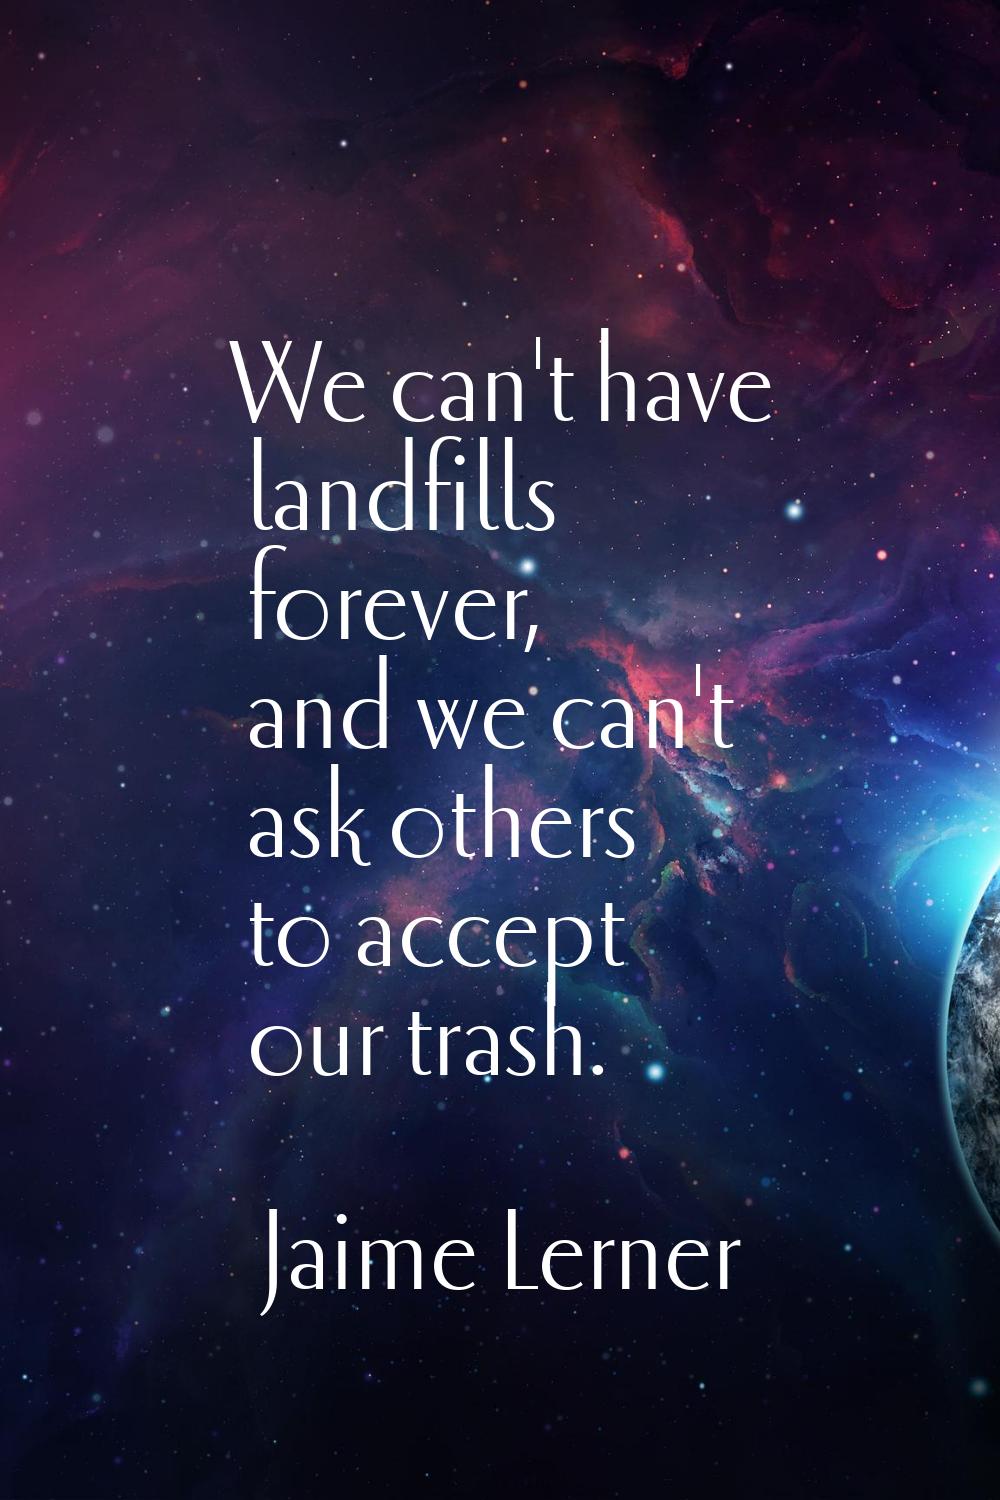 We can't have landfills forever, and we can't ask others to accept our trash.